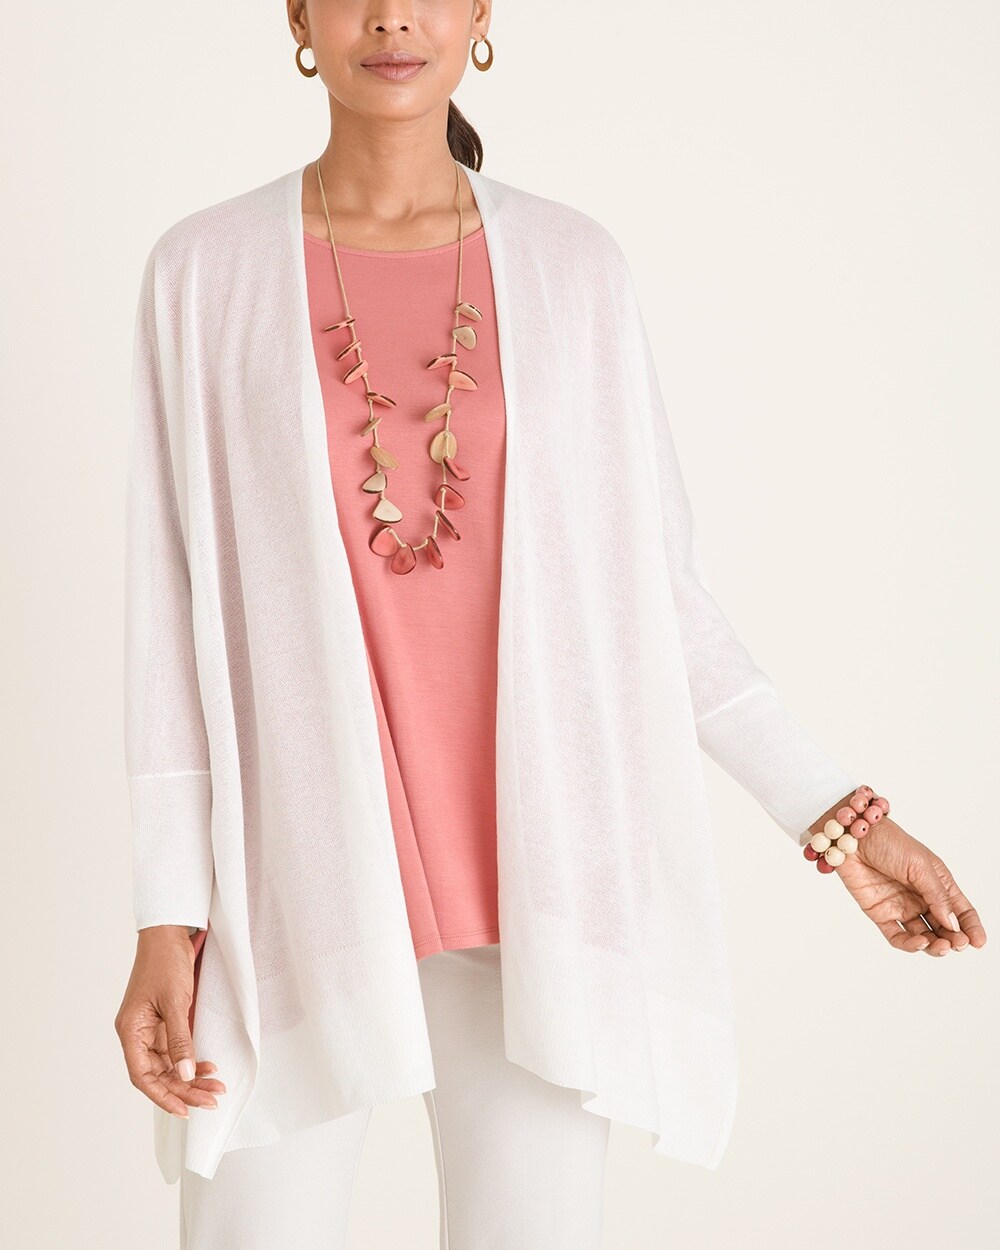 Marla Wynne for Chico's Open-Front Cardigan